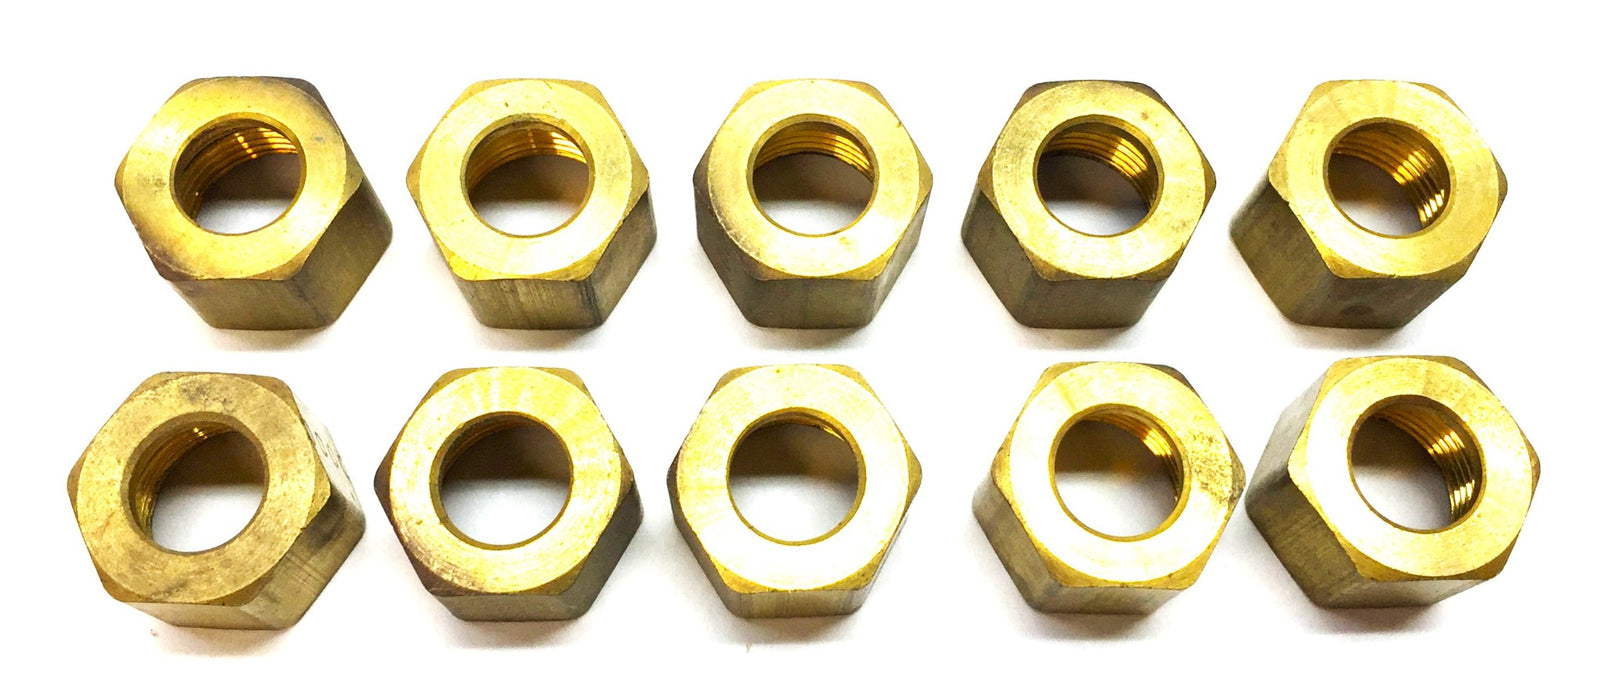 Unbranded 5/16 Brass Compression Fitting [Lot of 10] NOS